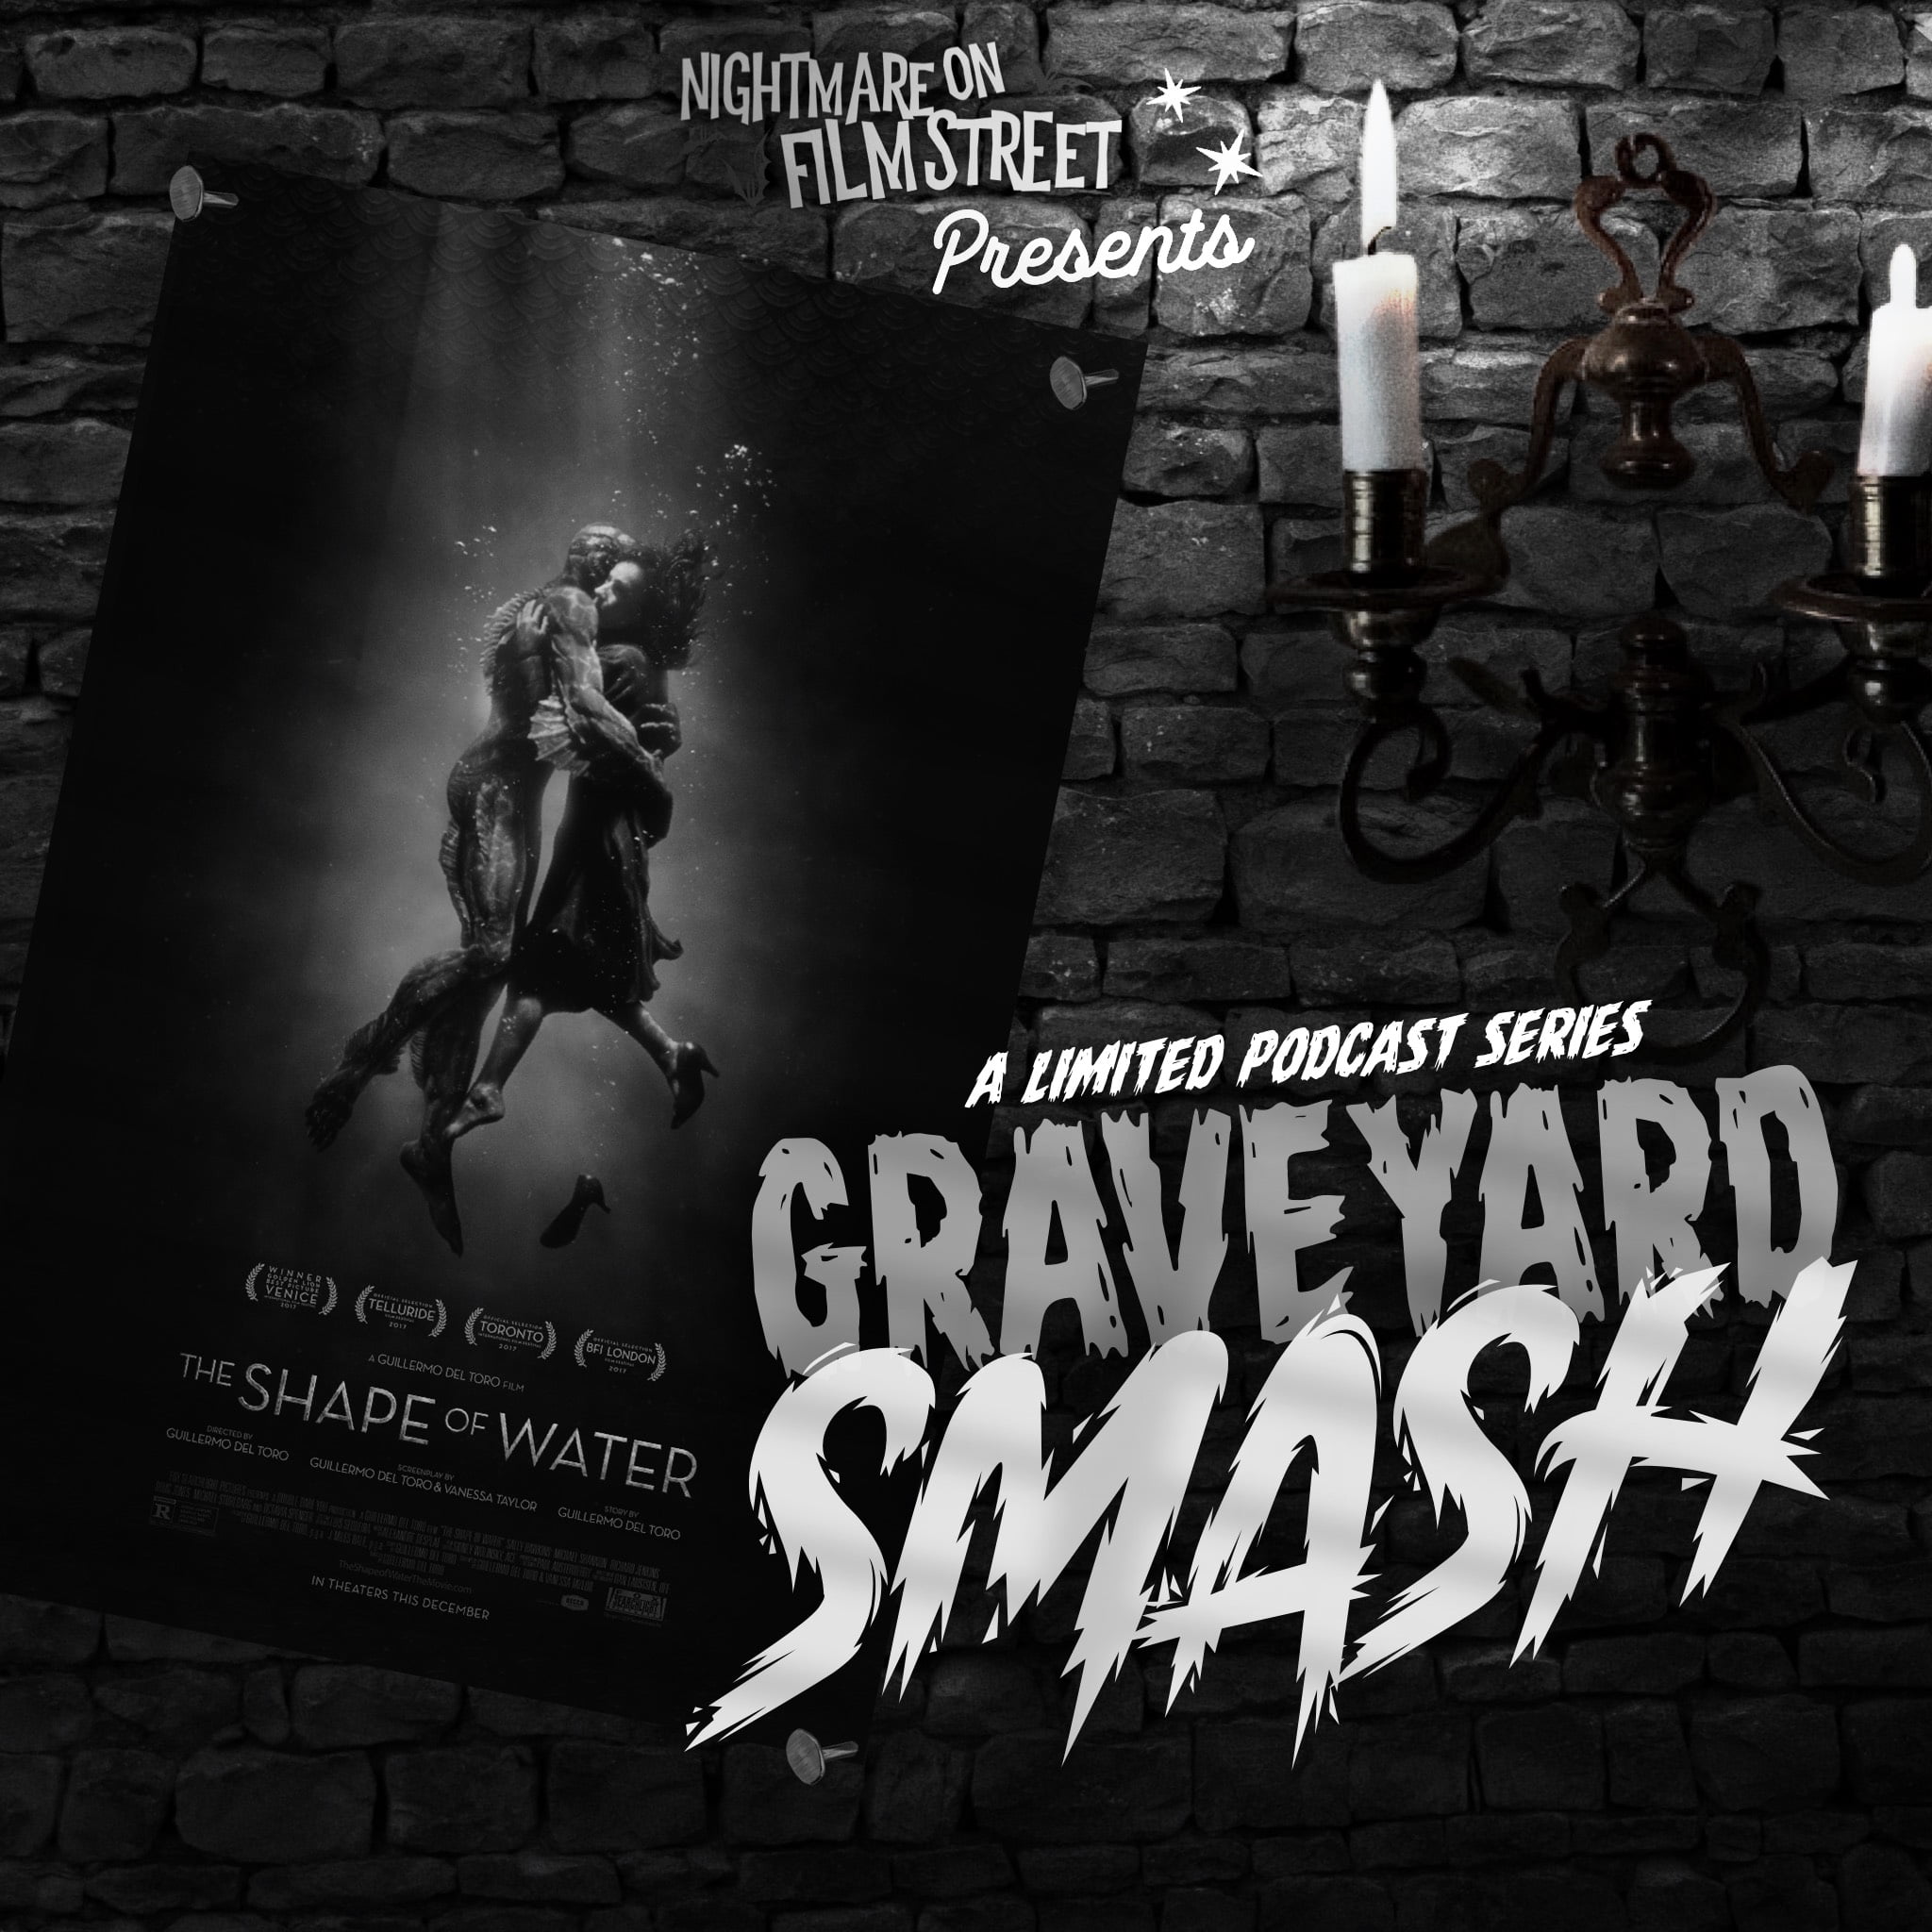 Graveyard Smash - The Shape Of Water - Nightmare On Film Street Podcast